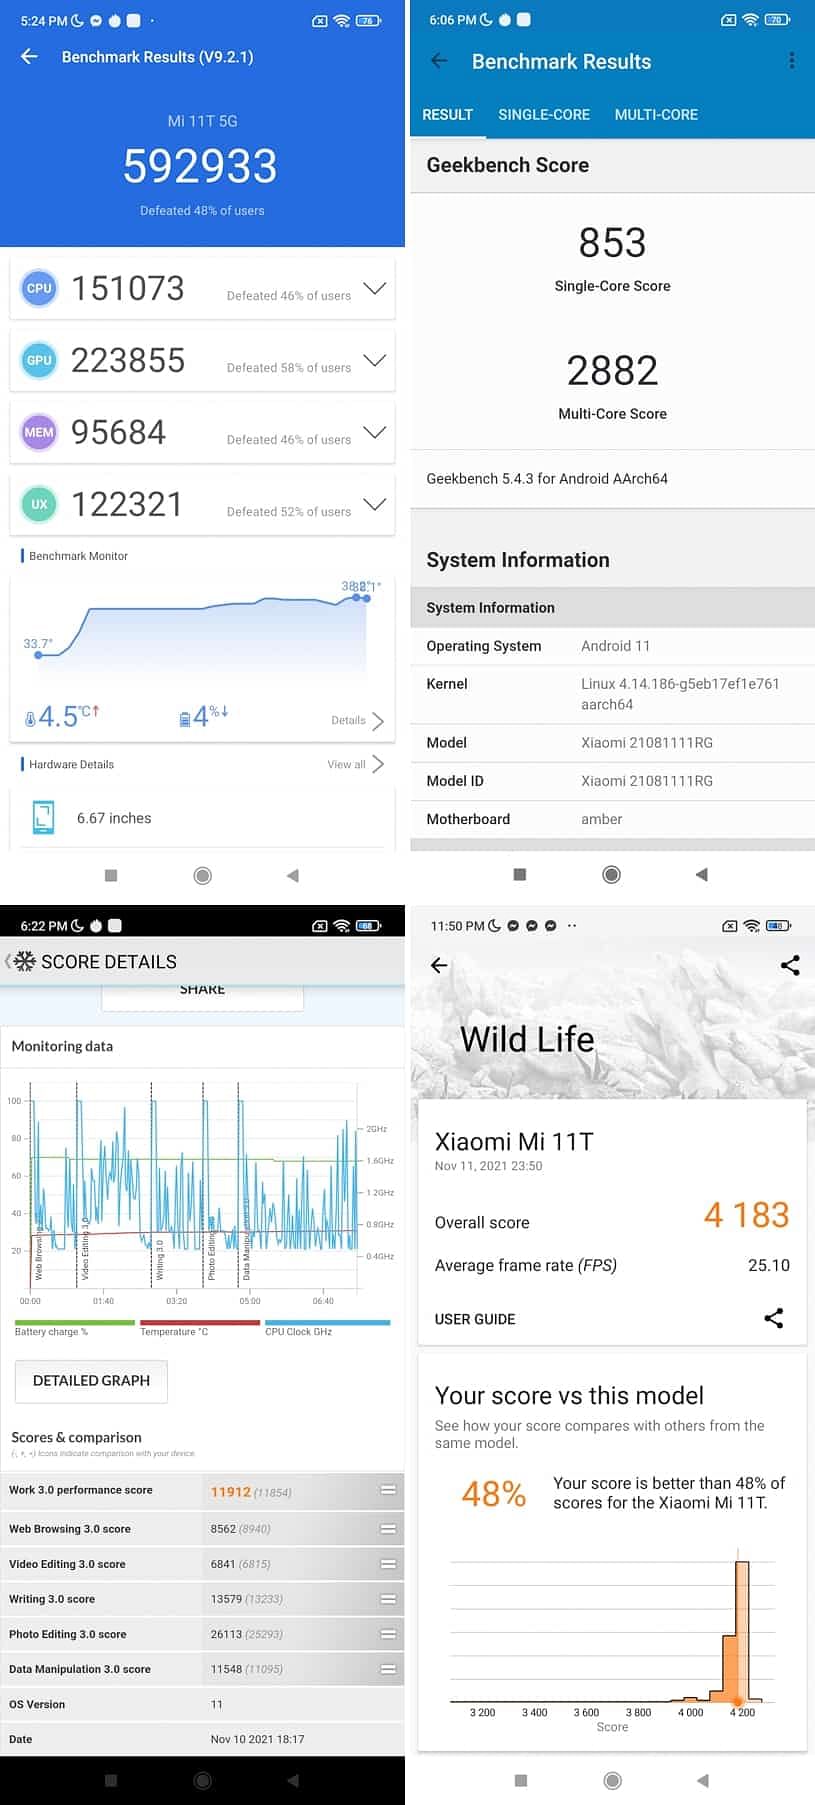 AnTuTu Storge Benchmark Results on Xiaomi 11T Pro – Performance